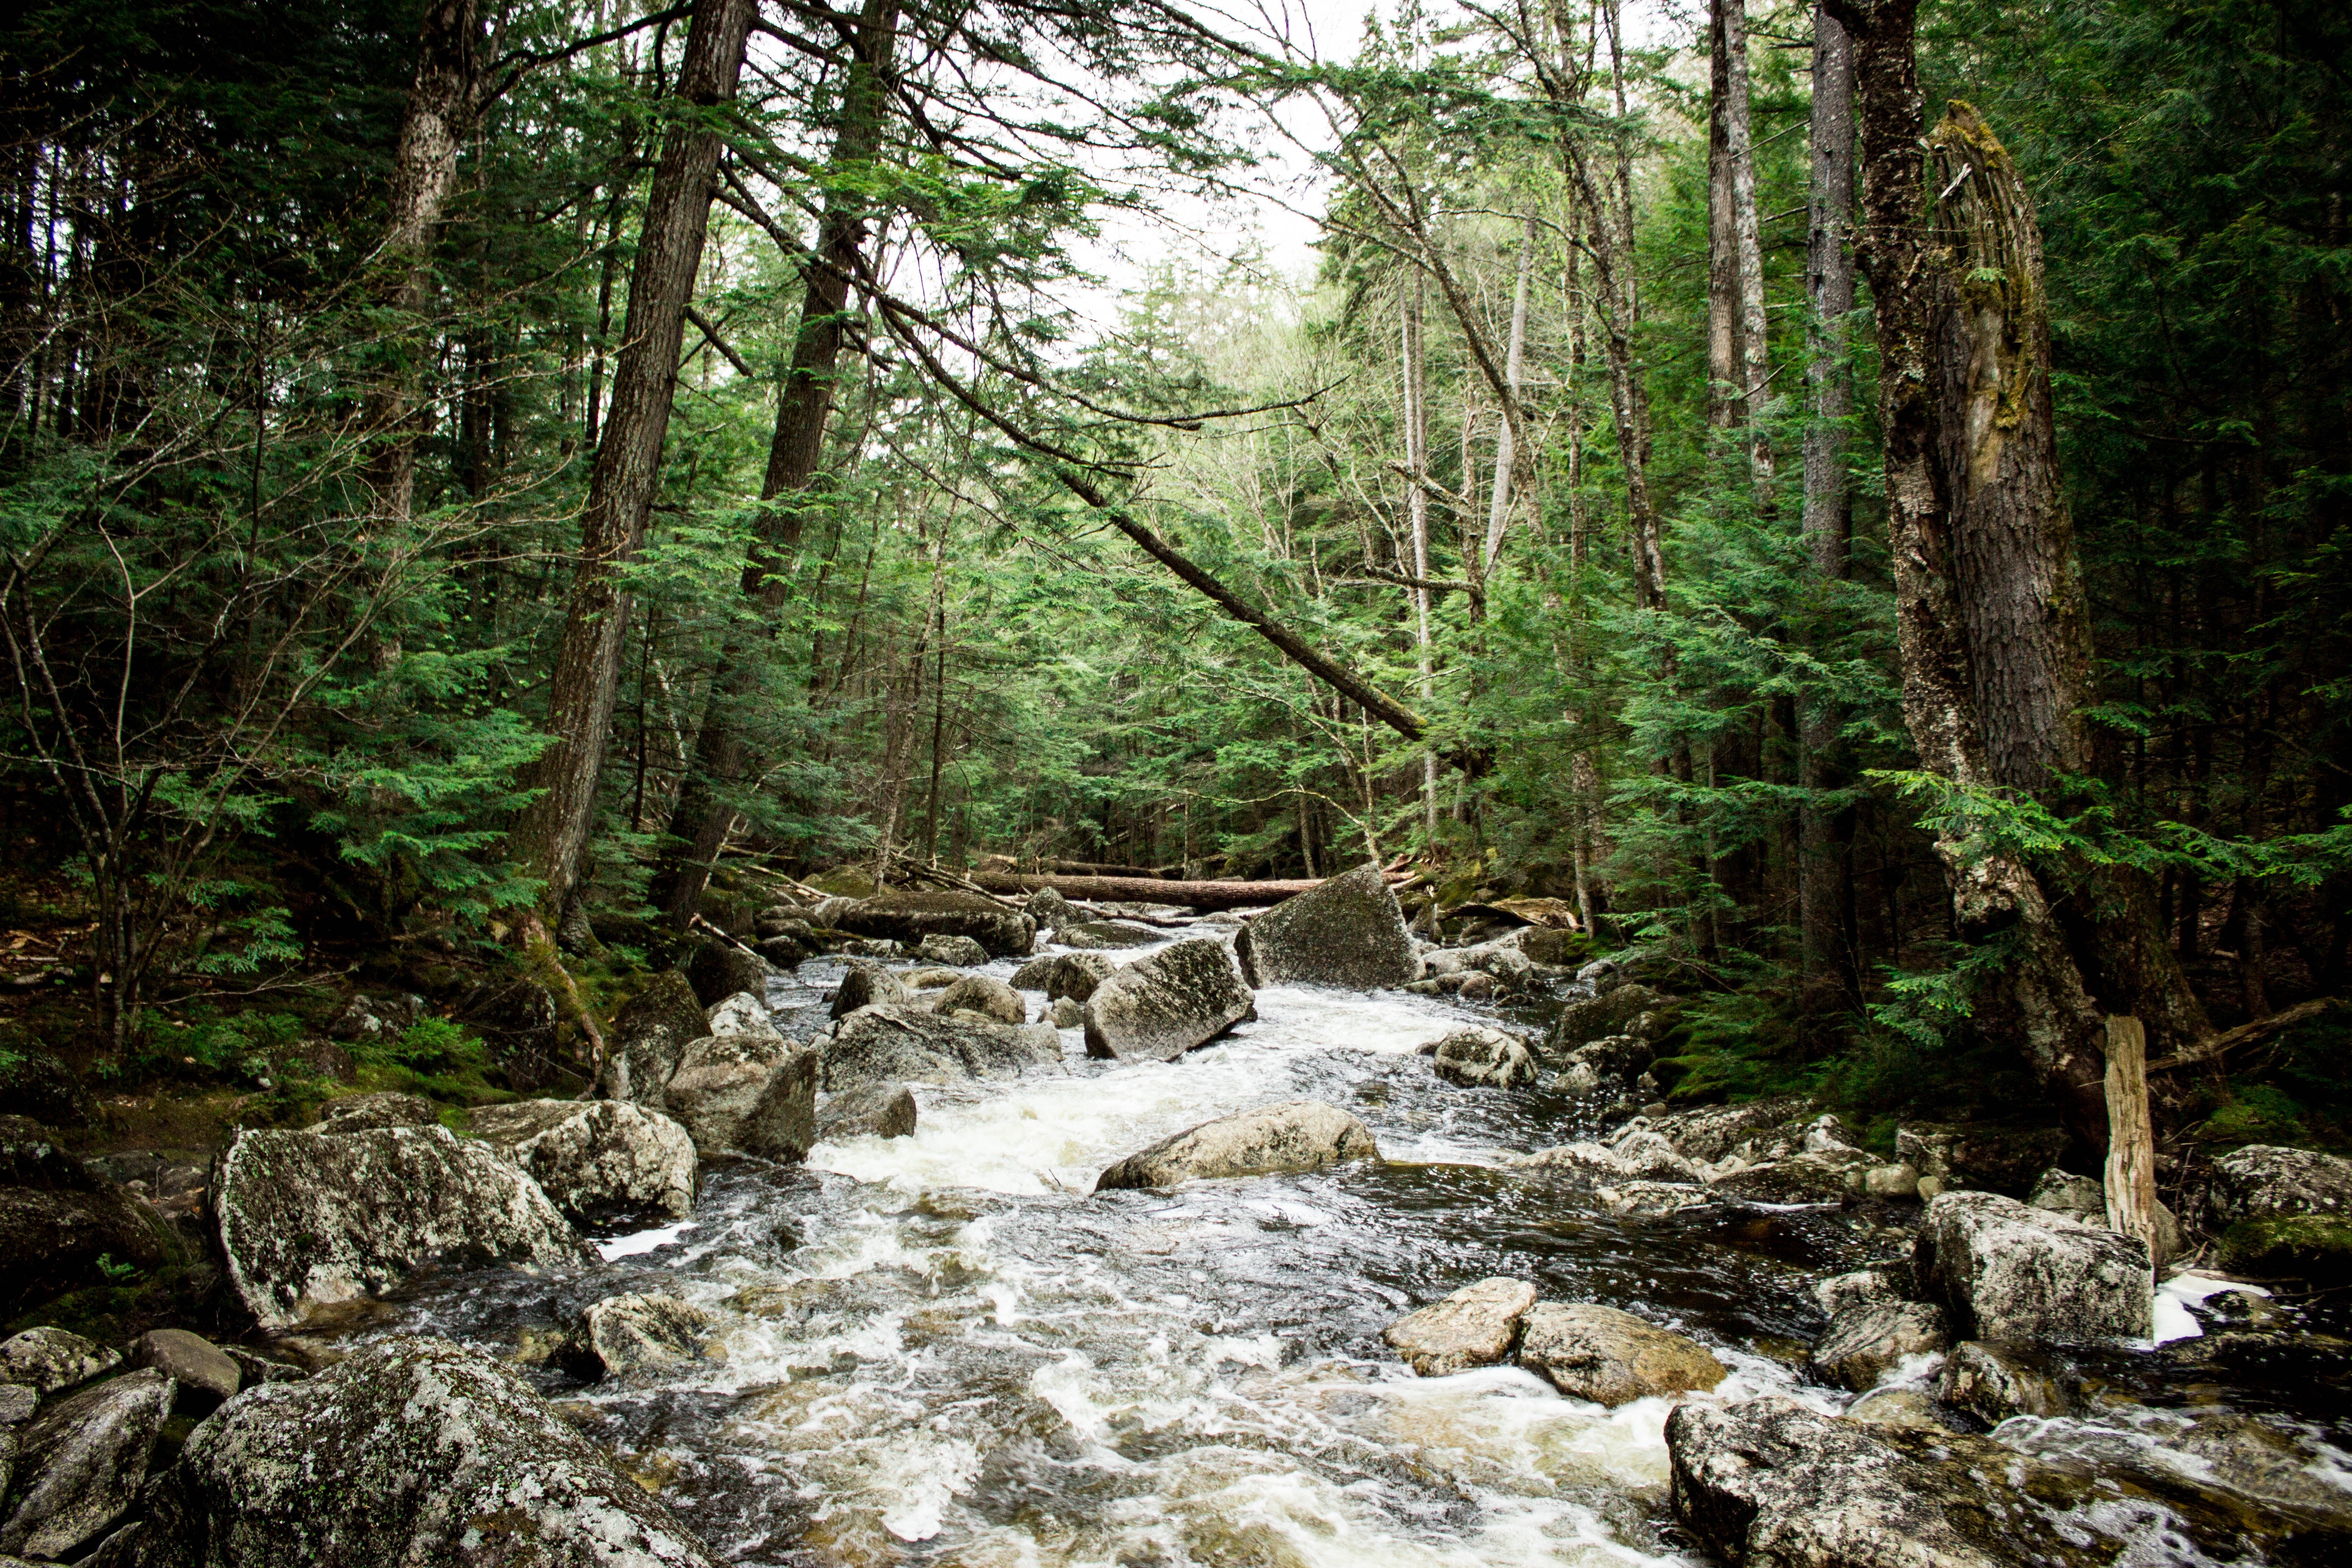 A fast-flowing river in the woods with big rocks